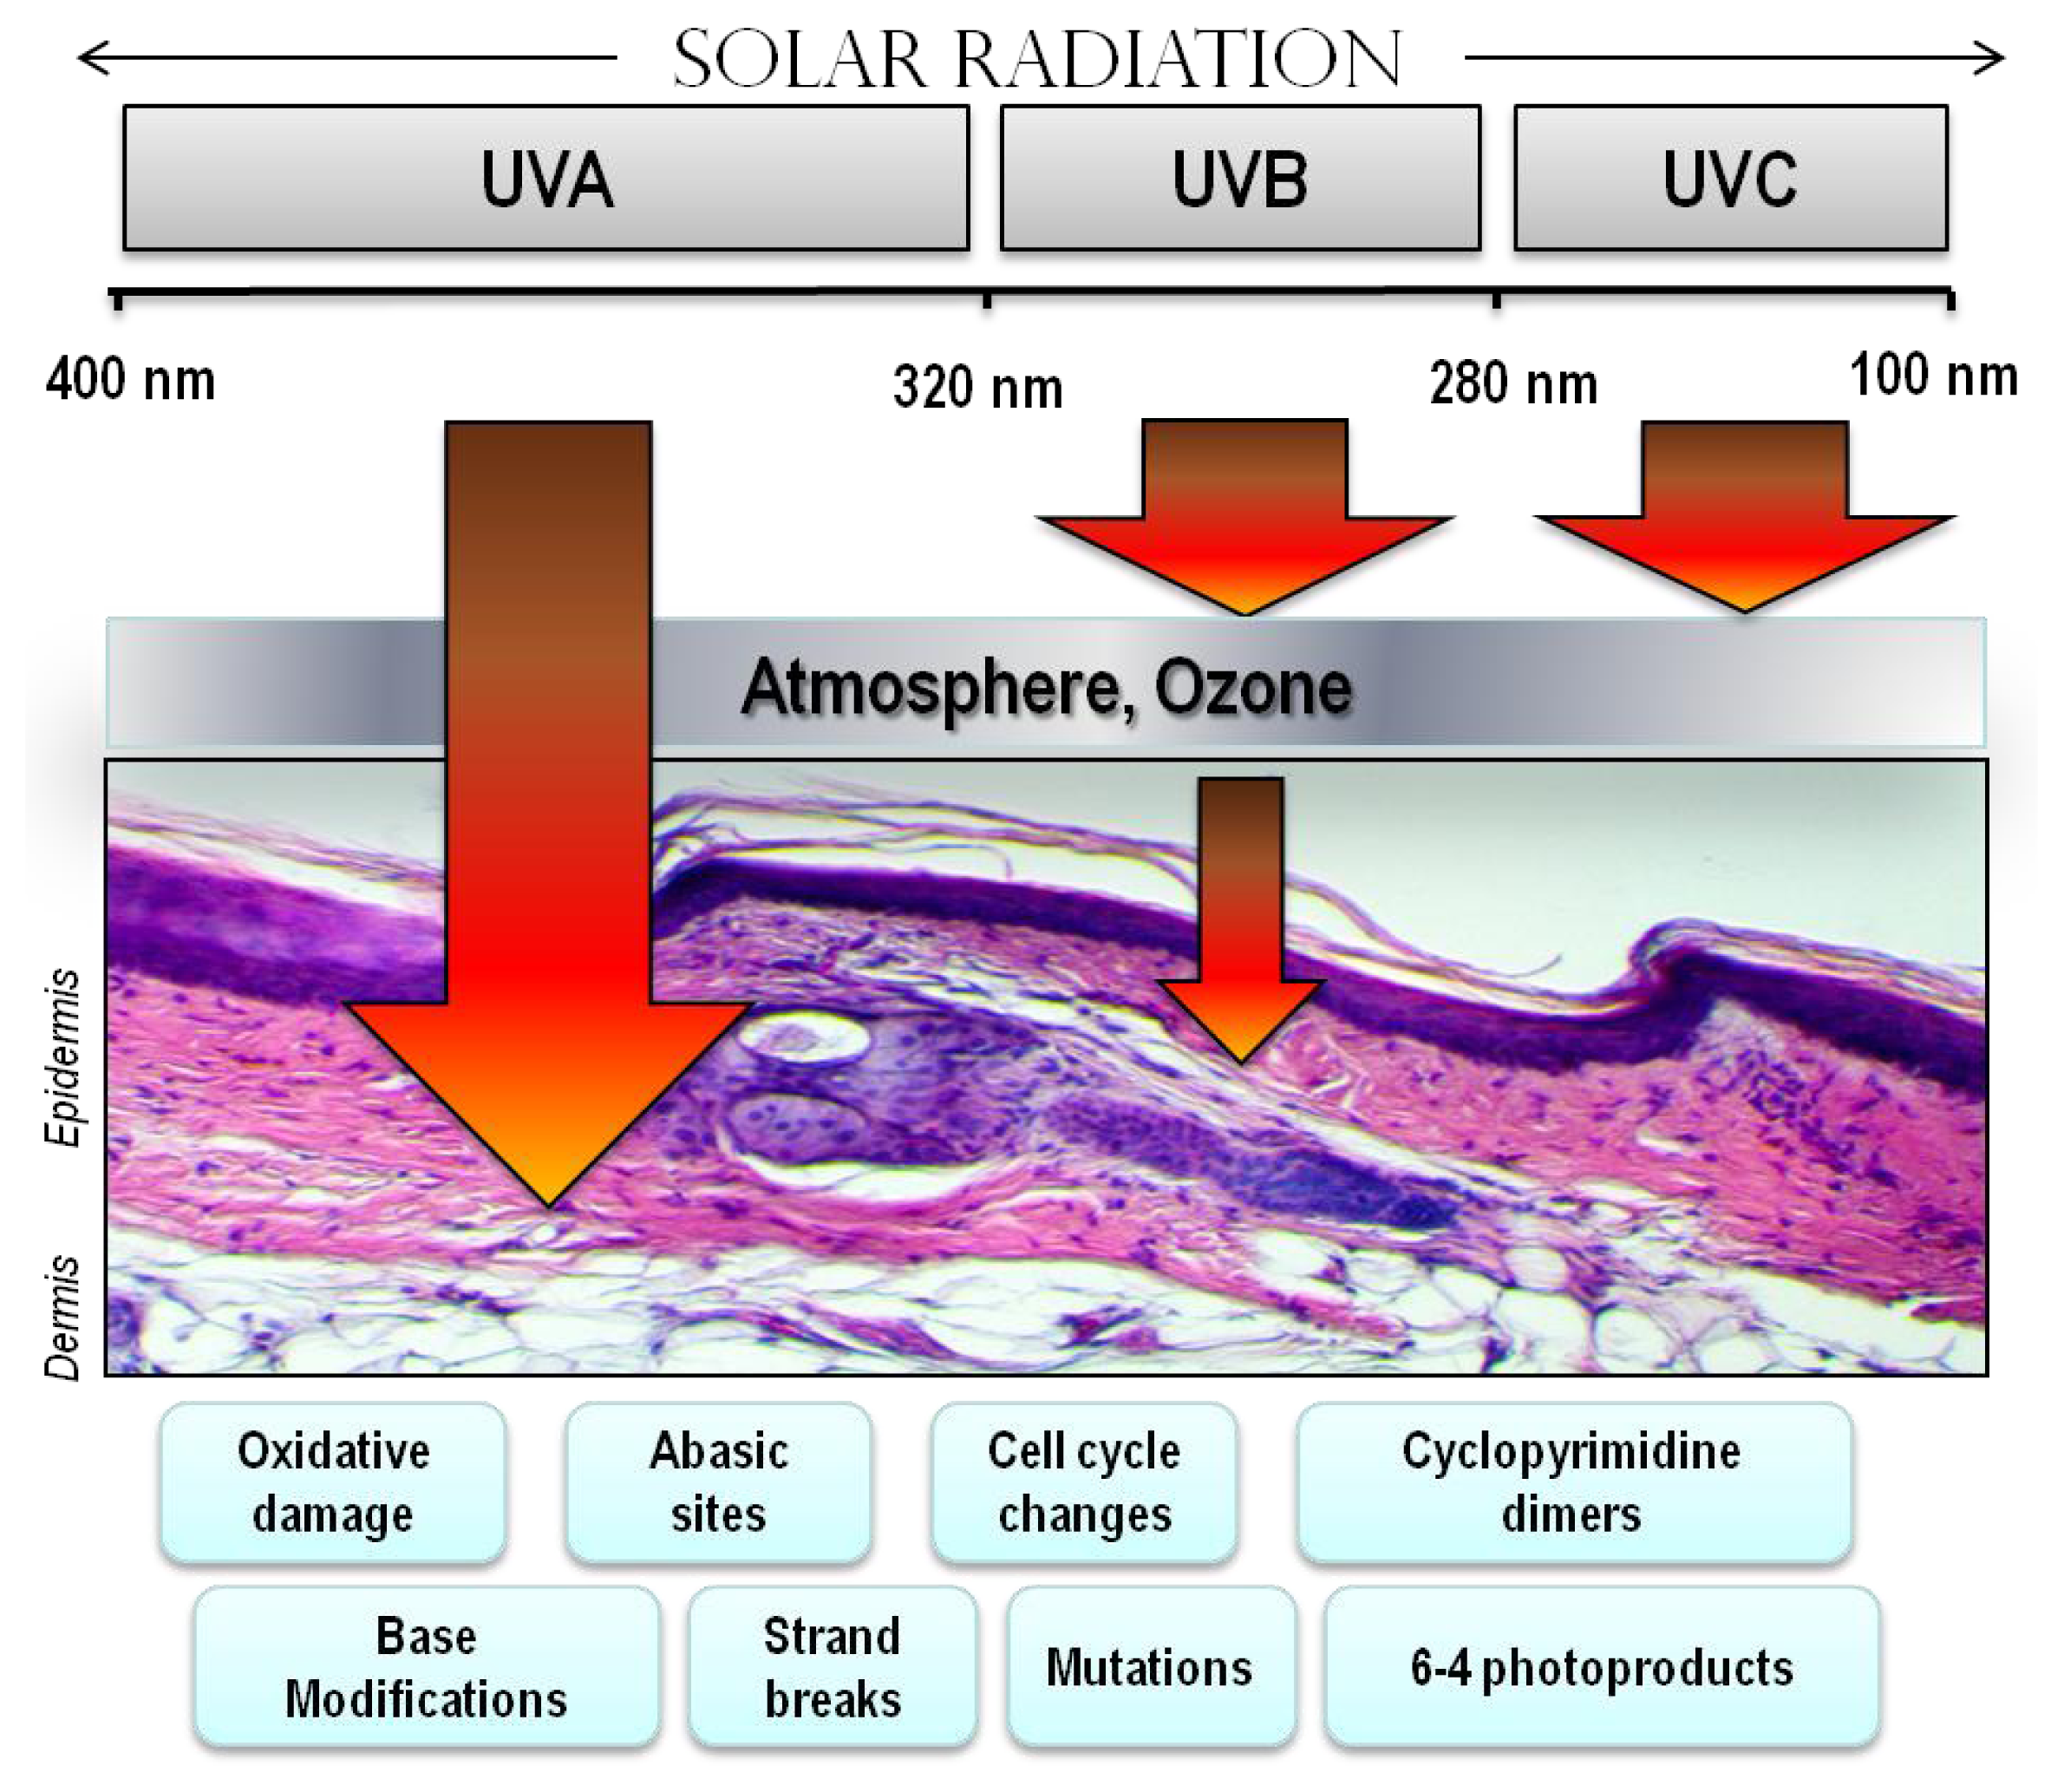 What is UV radiation?